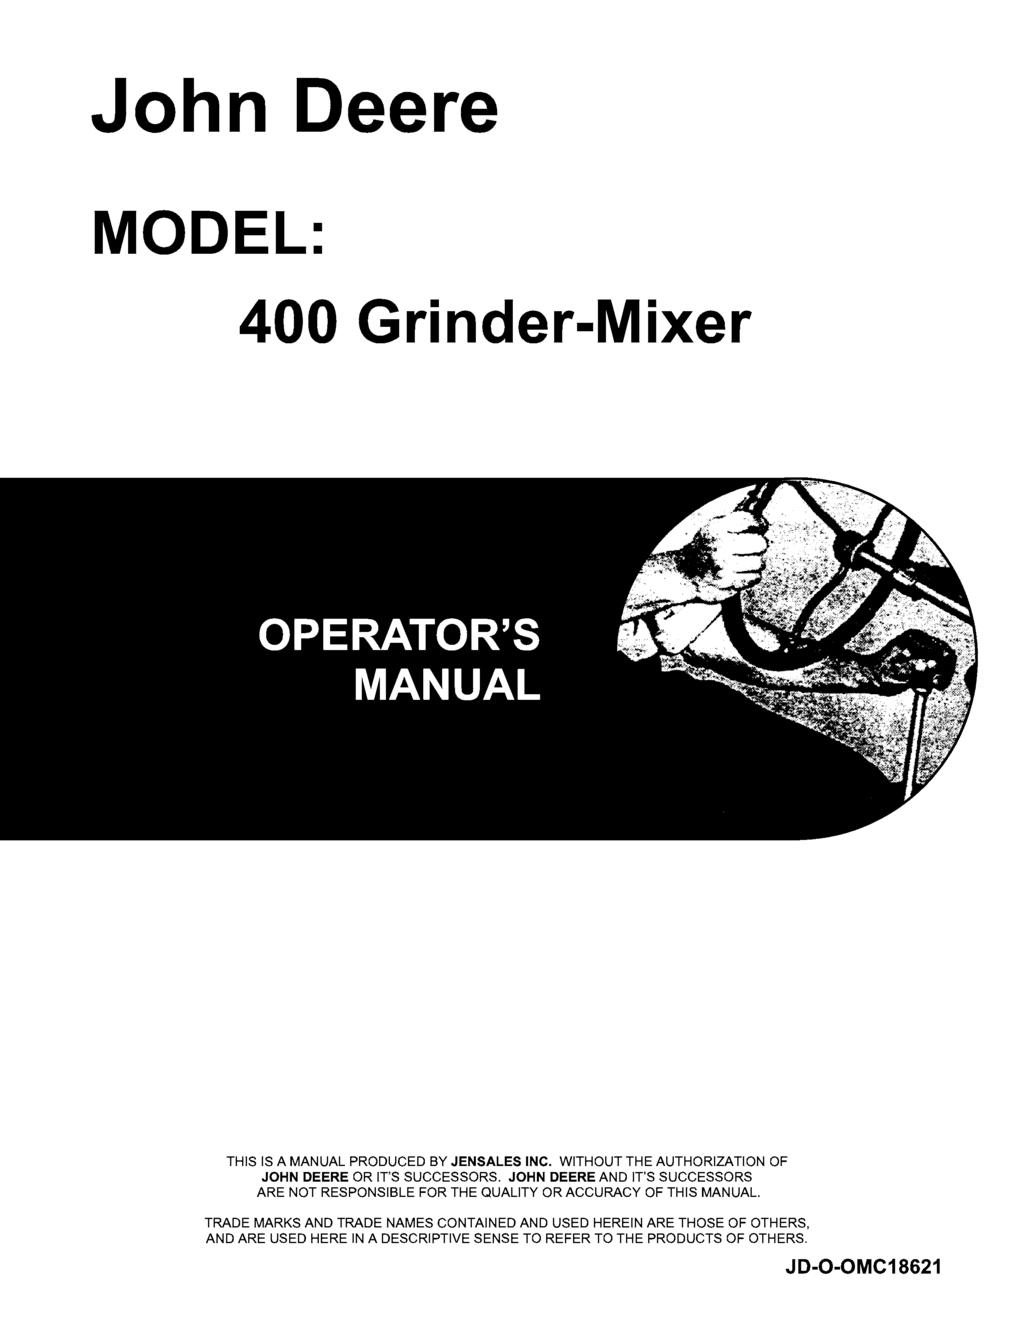 John Deere MODEL: 400 Grinder-Mixer THIS IS A MANUAL PRODUCED BY JENSALES INC. WITHOUT THE AUTHORIZATION OF JOHN DEERE OR IT'S SUCCESSORS.